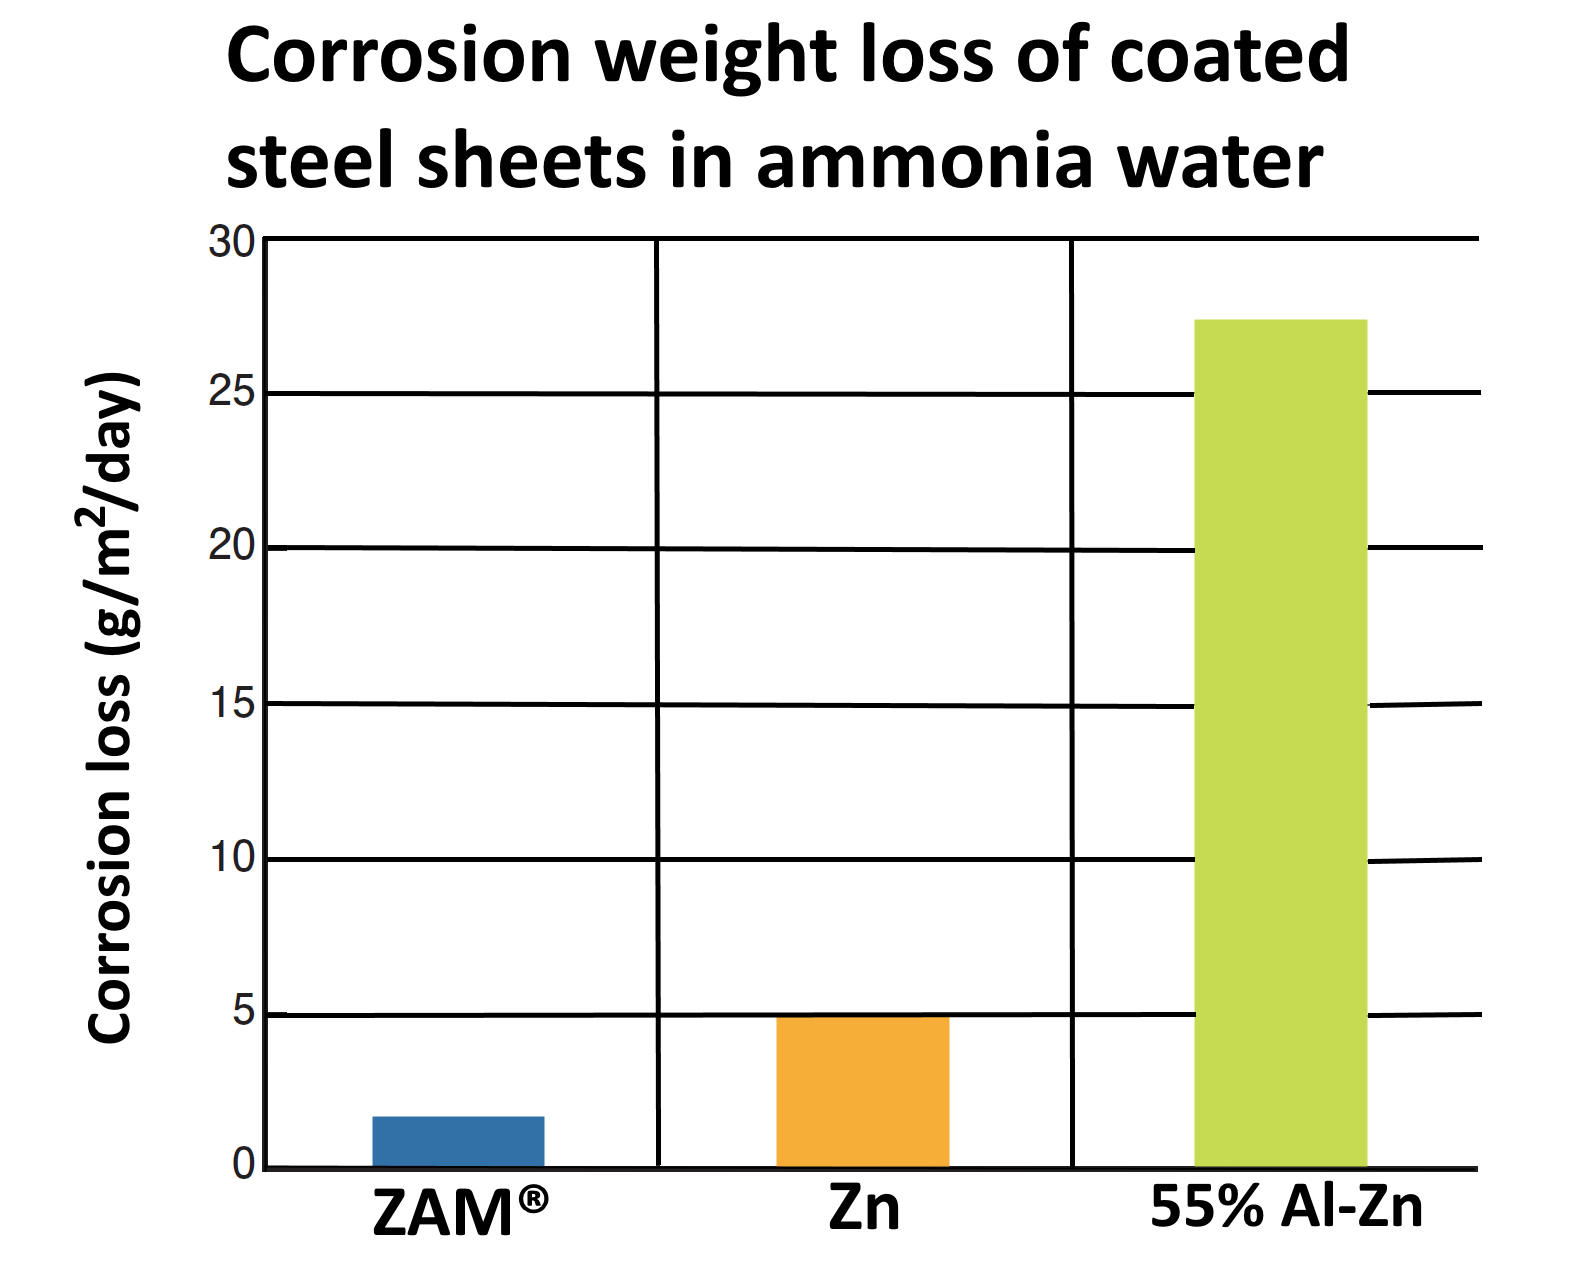 Graph comparing corrosion weight loss of ZAM in ammonia water to other coated steel sheets